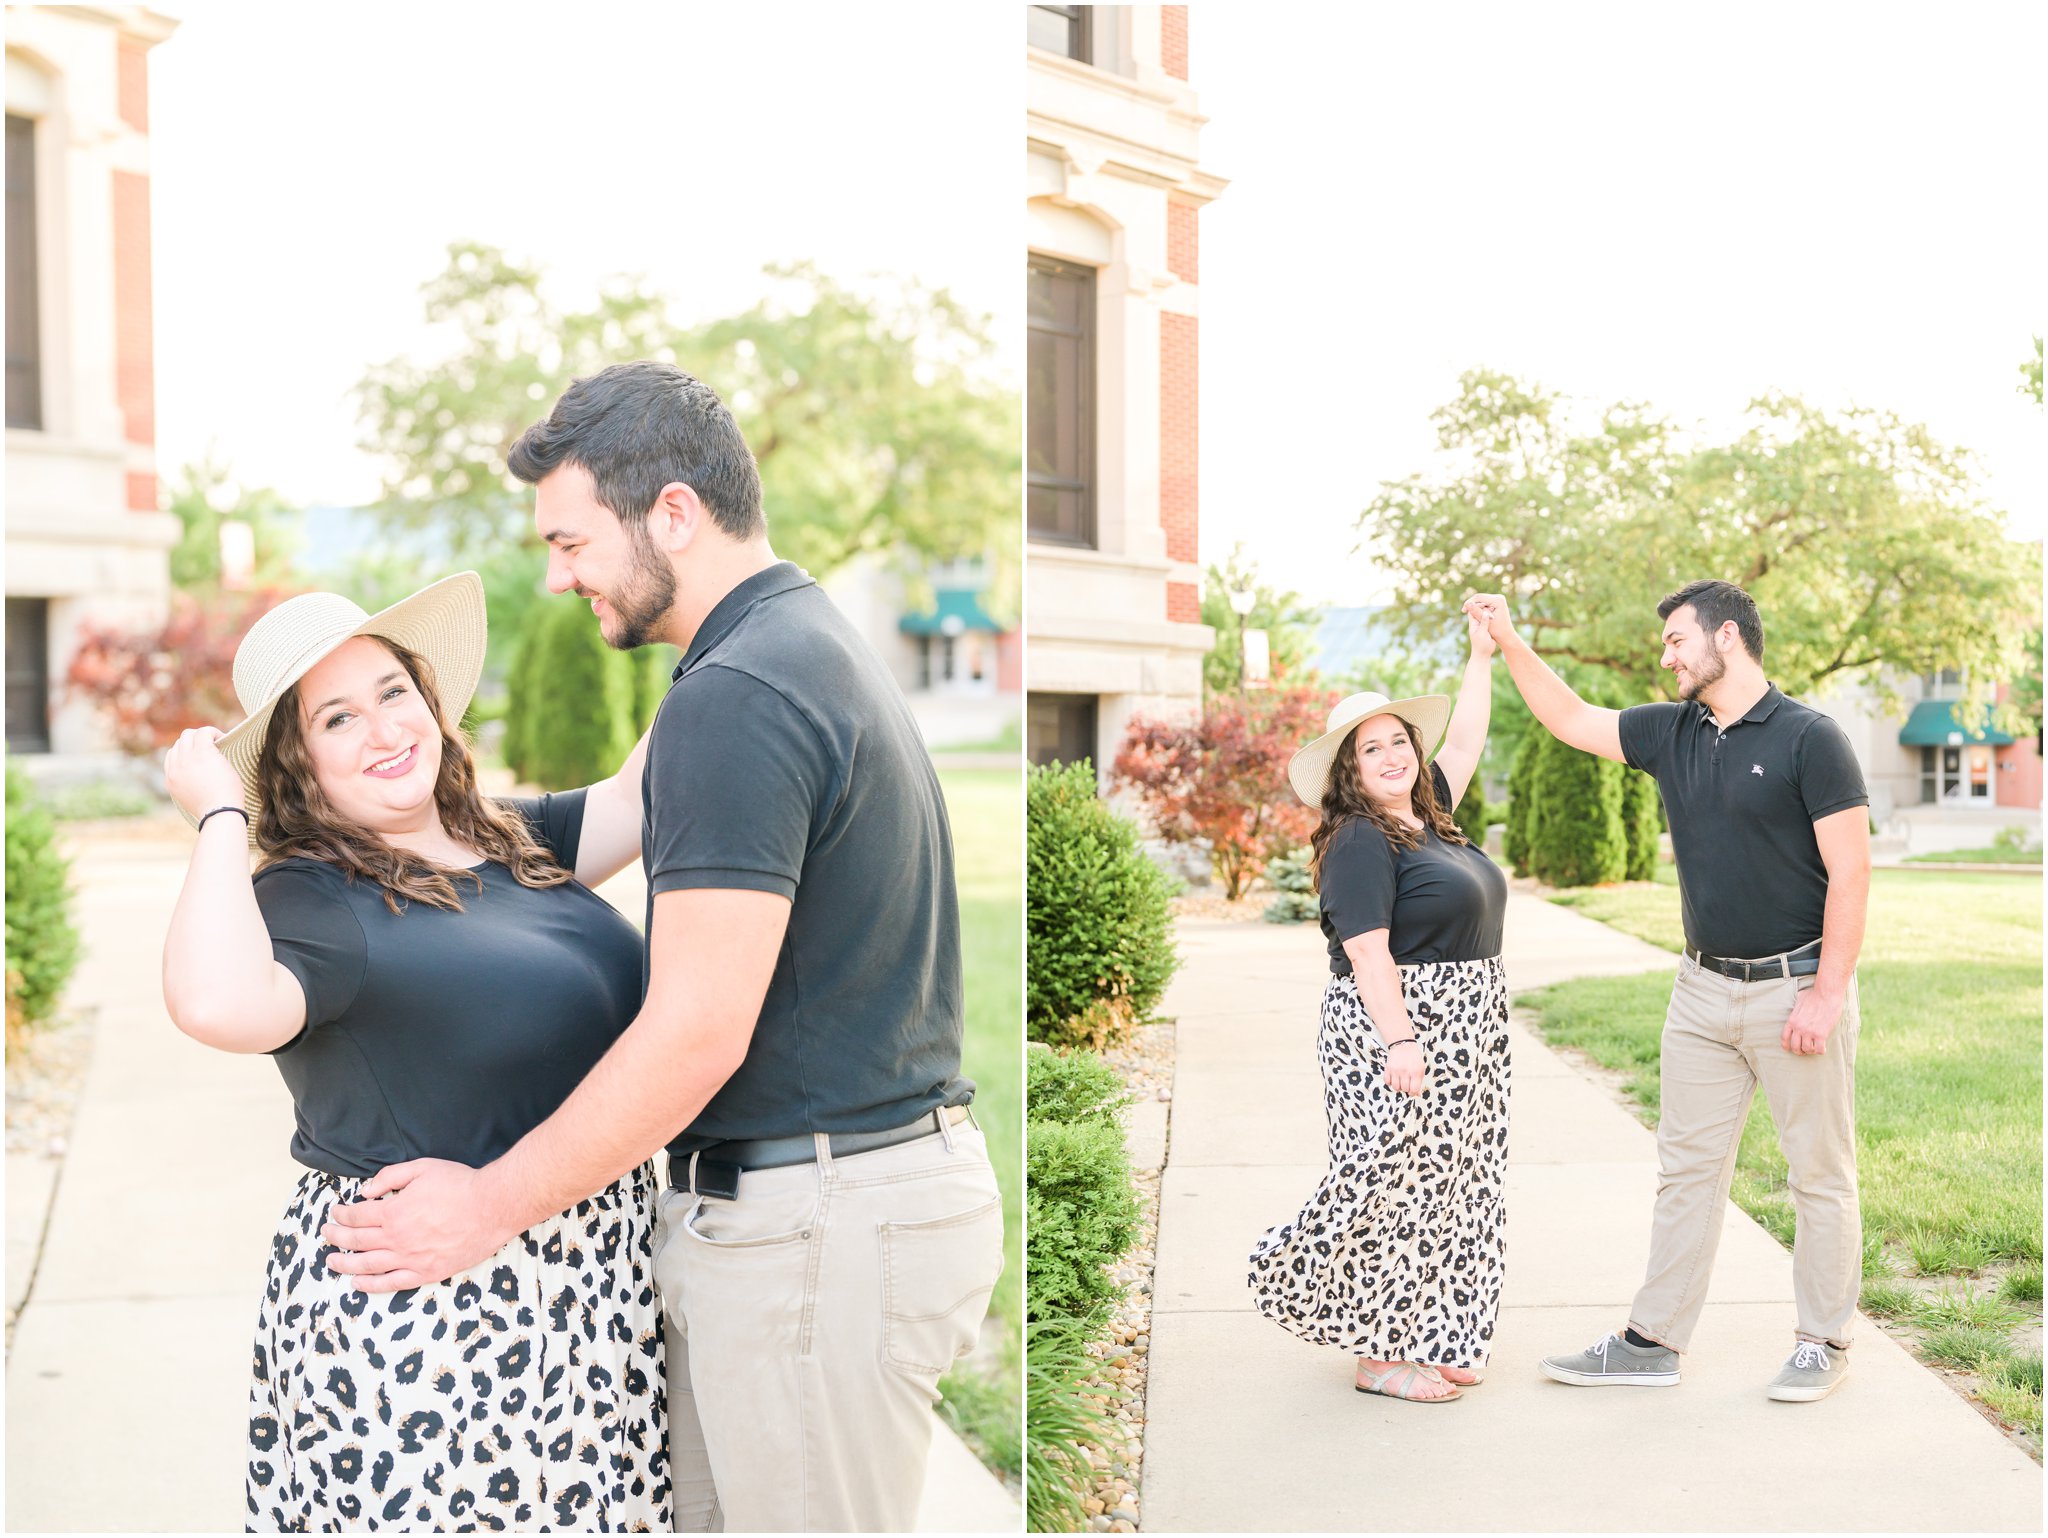 Dress swish Downtown Franklin, Indiana engagement session